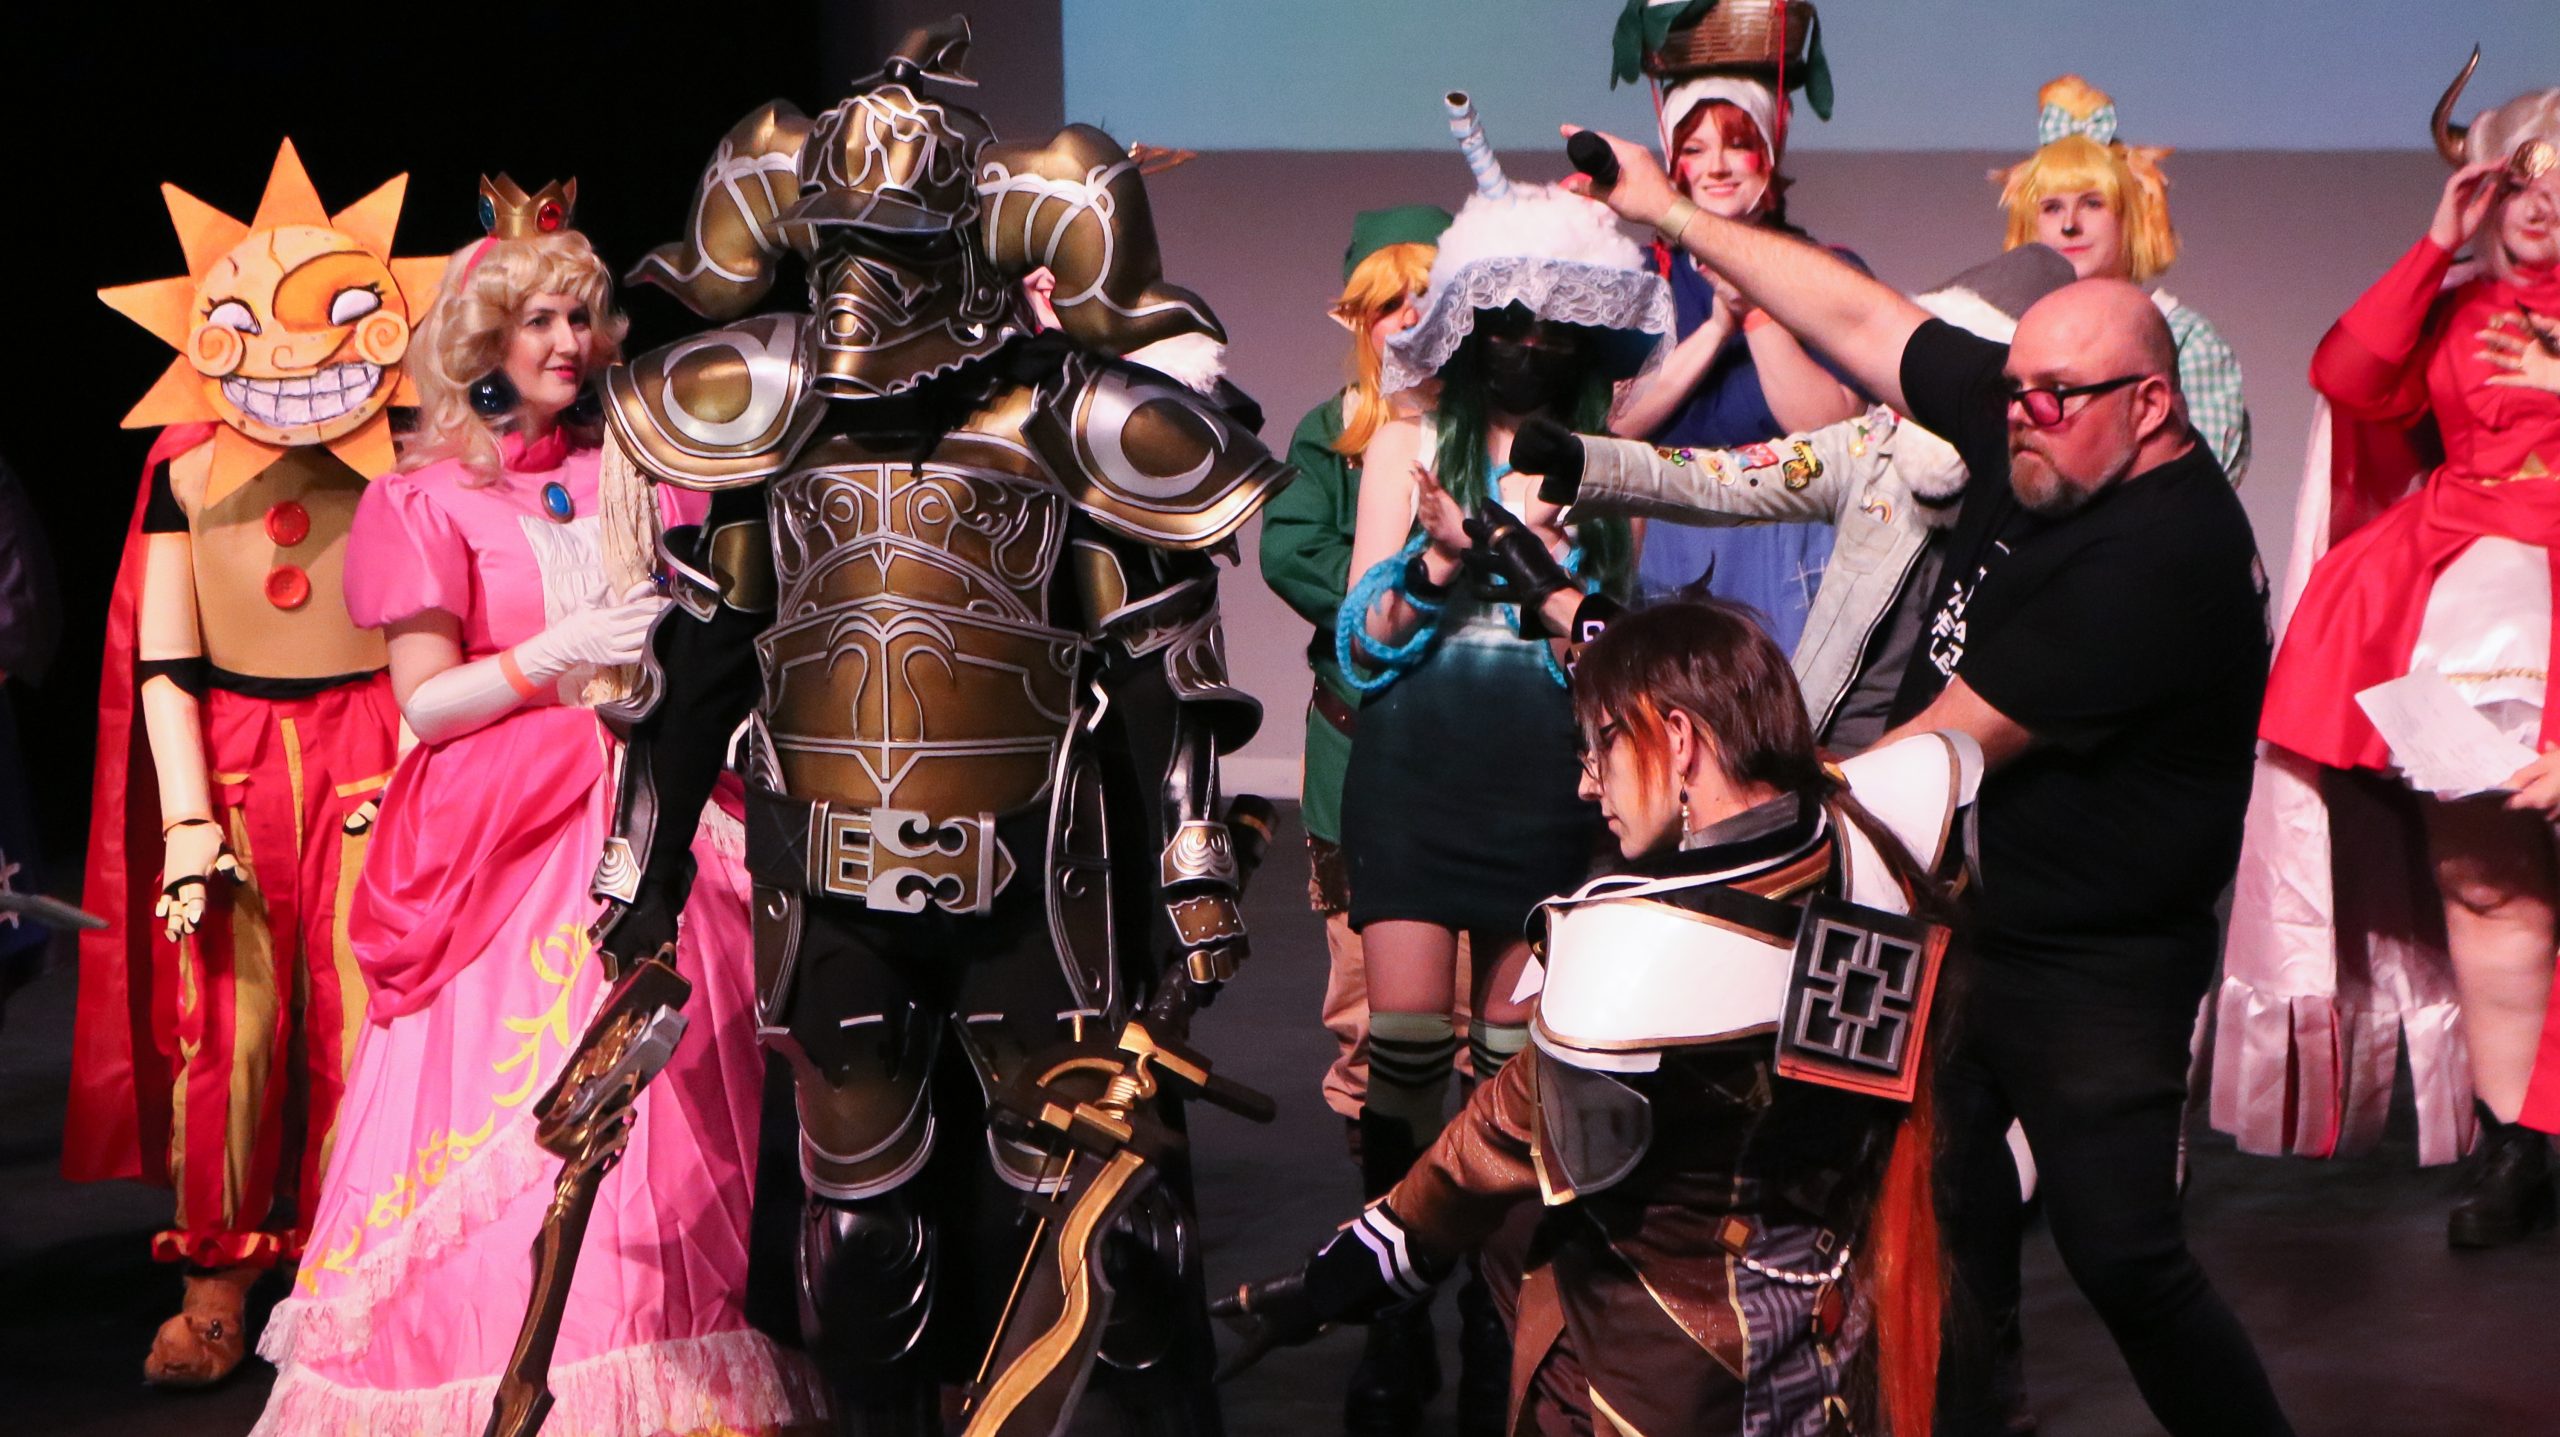 Logan events - AKACON, an anime and cosplay convention held in Beenleigh.